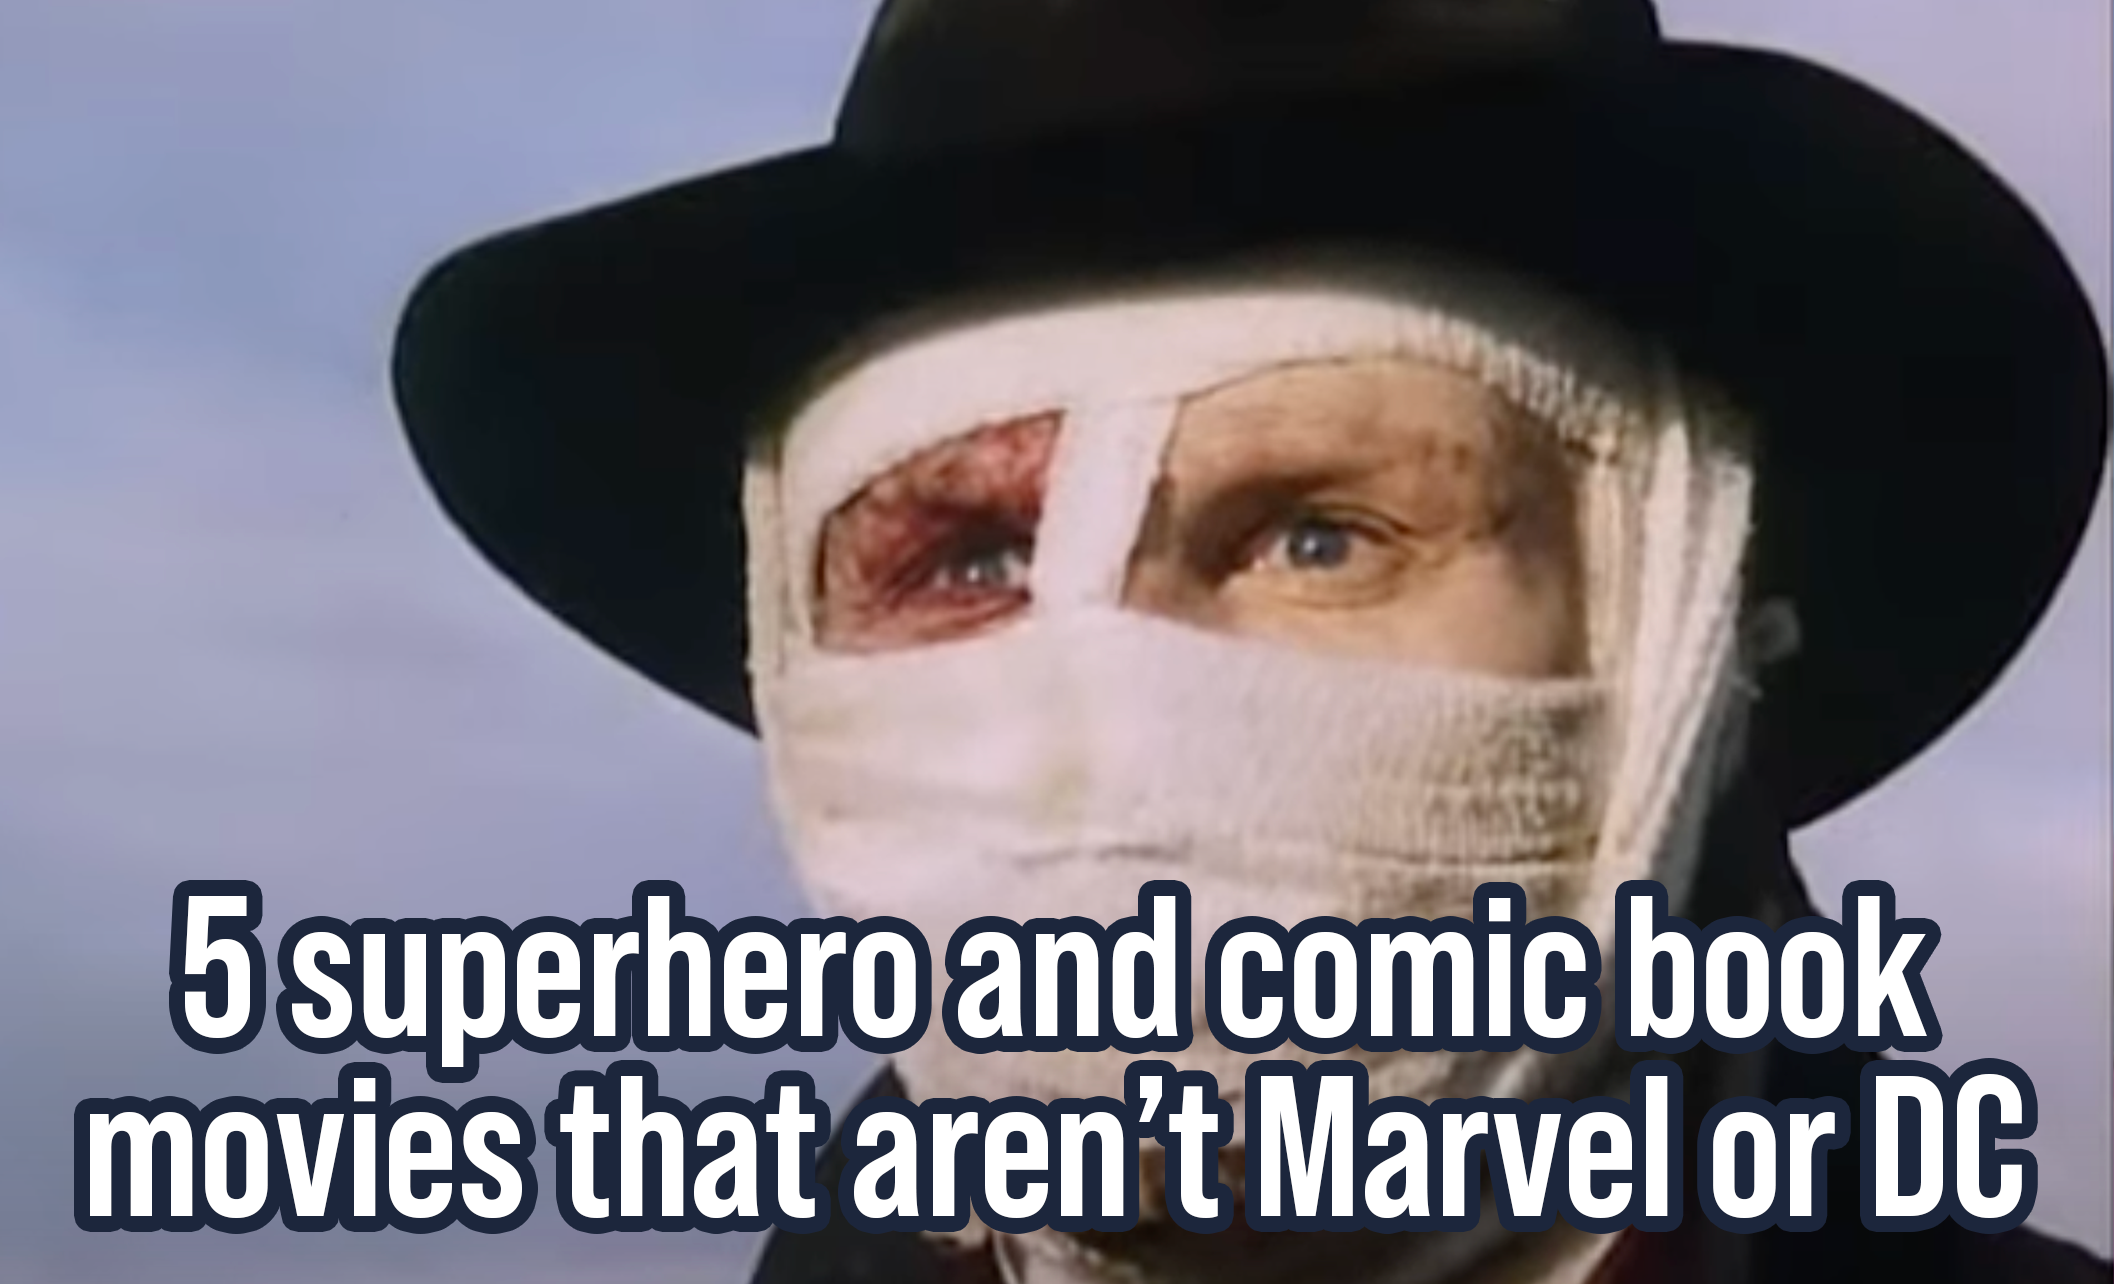 5 superhero and comic book movies that aren’t Marvel or DC